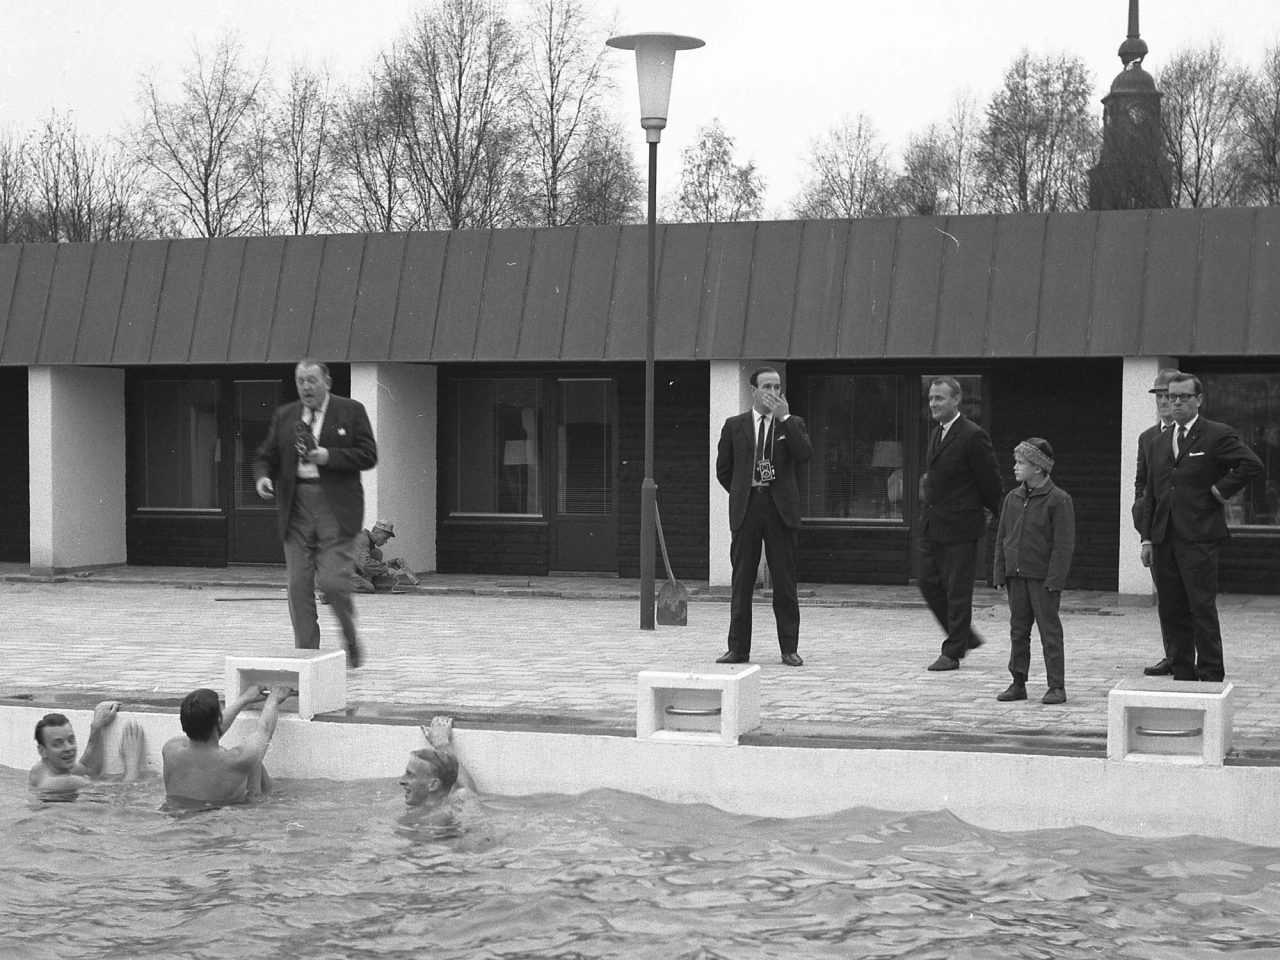 Men in suits, two with cameras, stand on the edge of a pool where children swim.